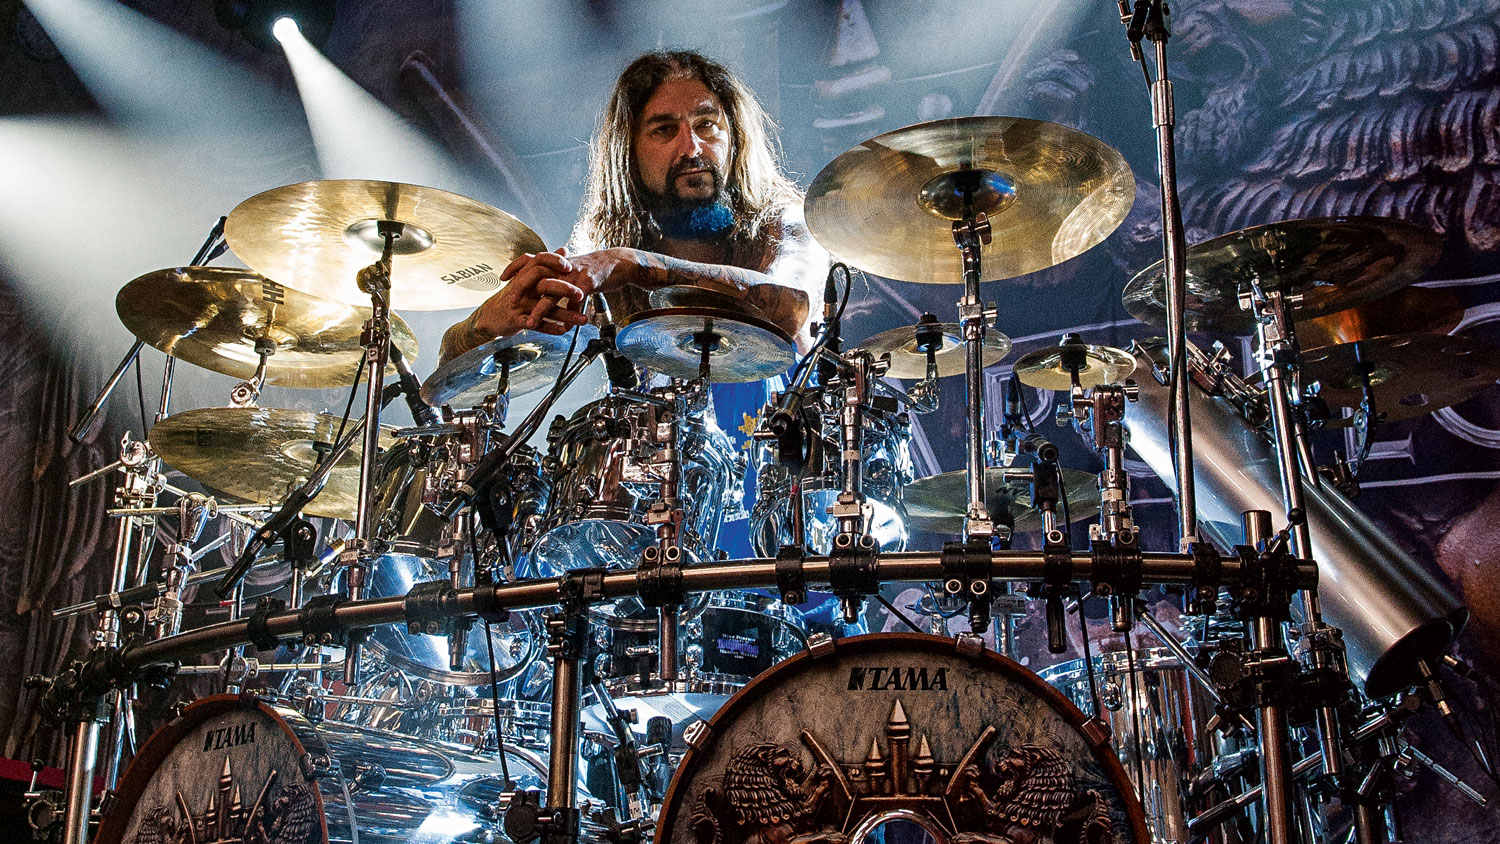 Mike drum kit. Mike Portnoy Dream Theater. Dream Theater портной. Dream Theater барабанщик. Mike Portnoy Drums.